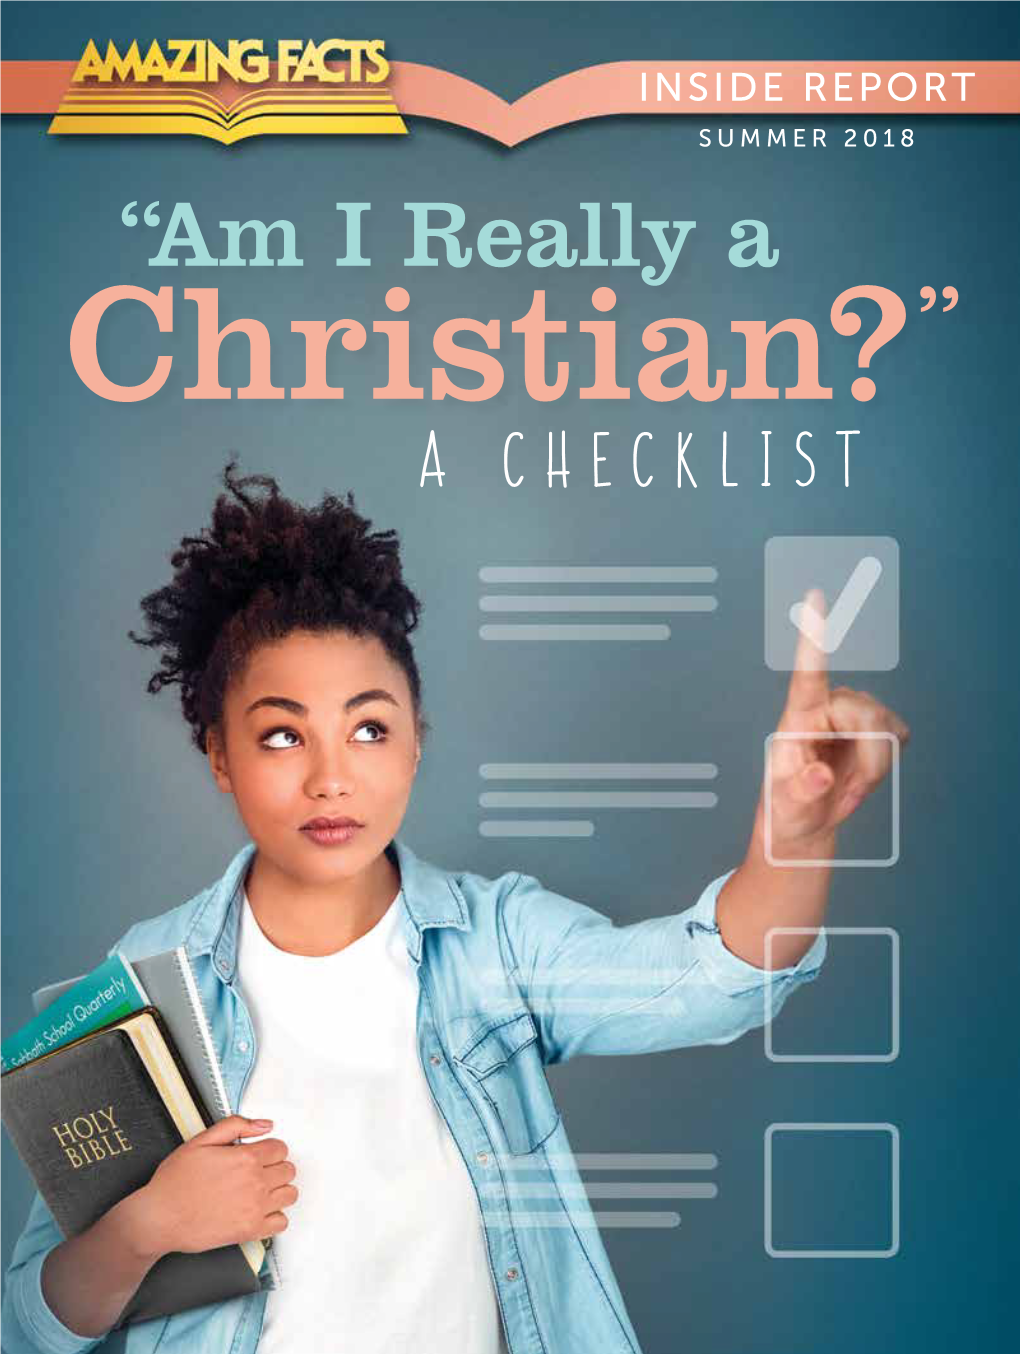 “Am I Really a Christian?” a CHECKLIST an E-COURSE by the AMAZING FACTS CENTER of EVANGELISM